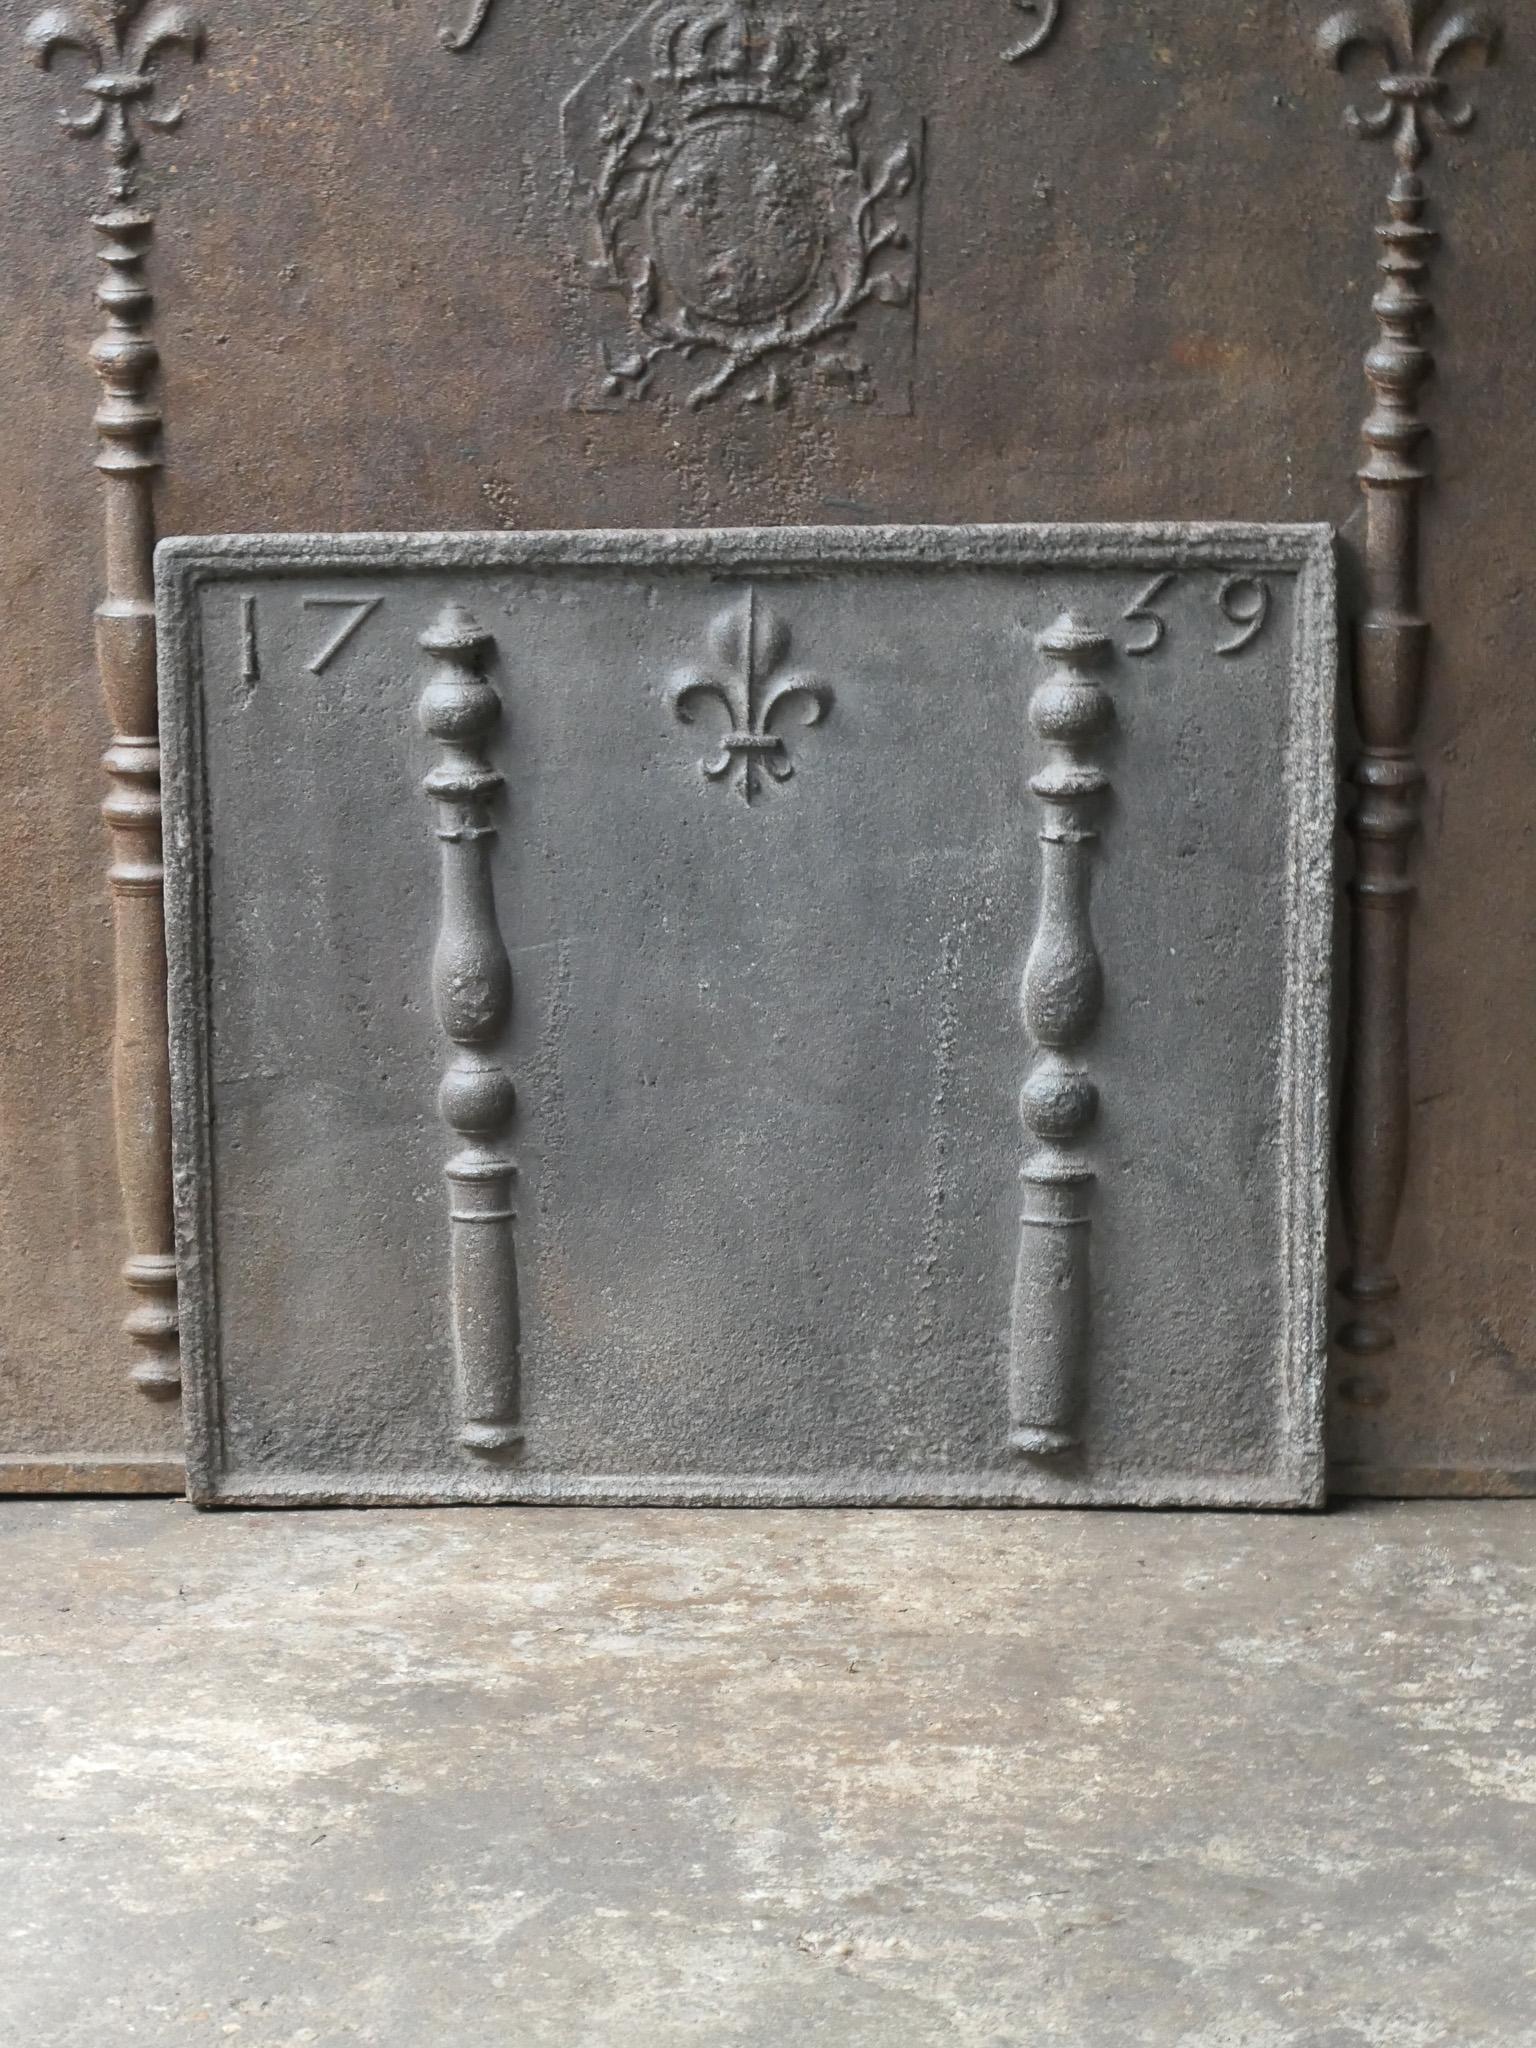 Beautiful 18th century French Louis XV fireback with pillars and Fleur de Lys. The Fleur de Lys (French Lily) symbolized royalty and aristocracy throughout Europe. The pillars stand for the club of Hercules and symbolize strength and the unknown.